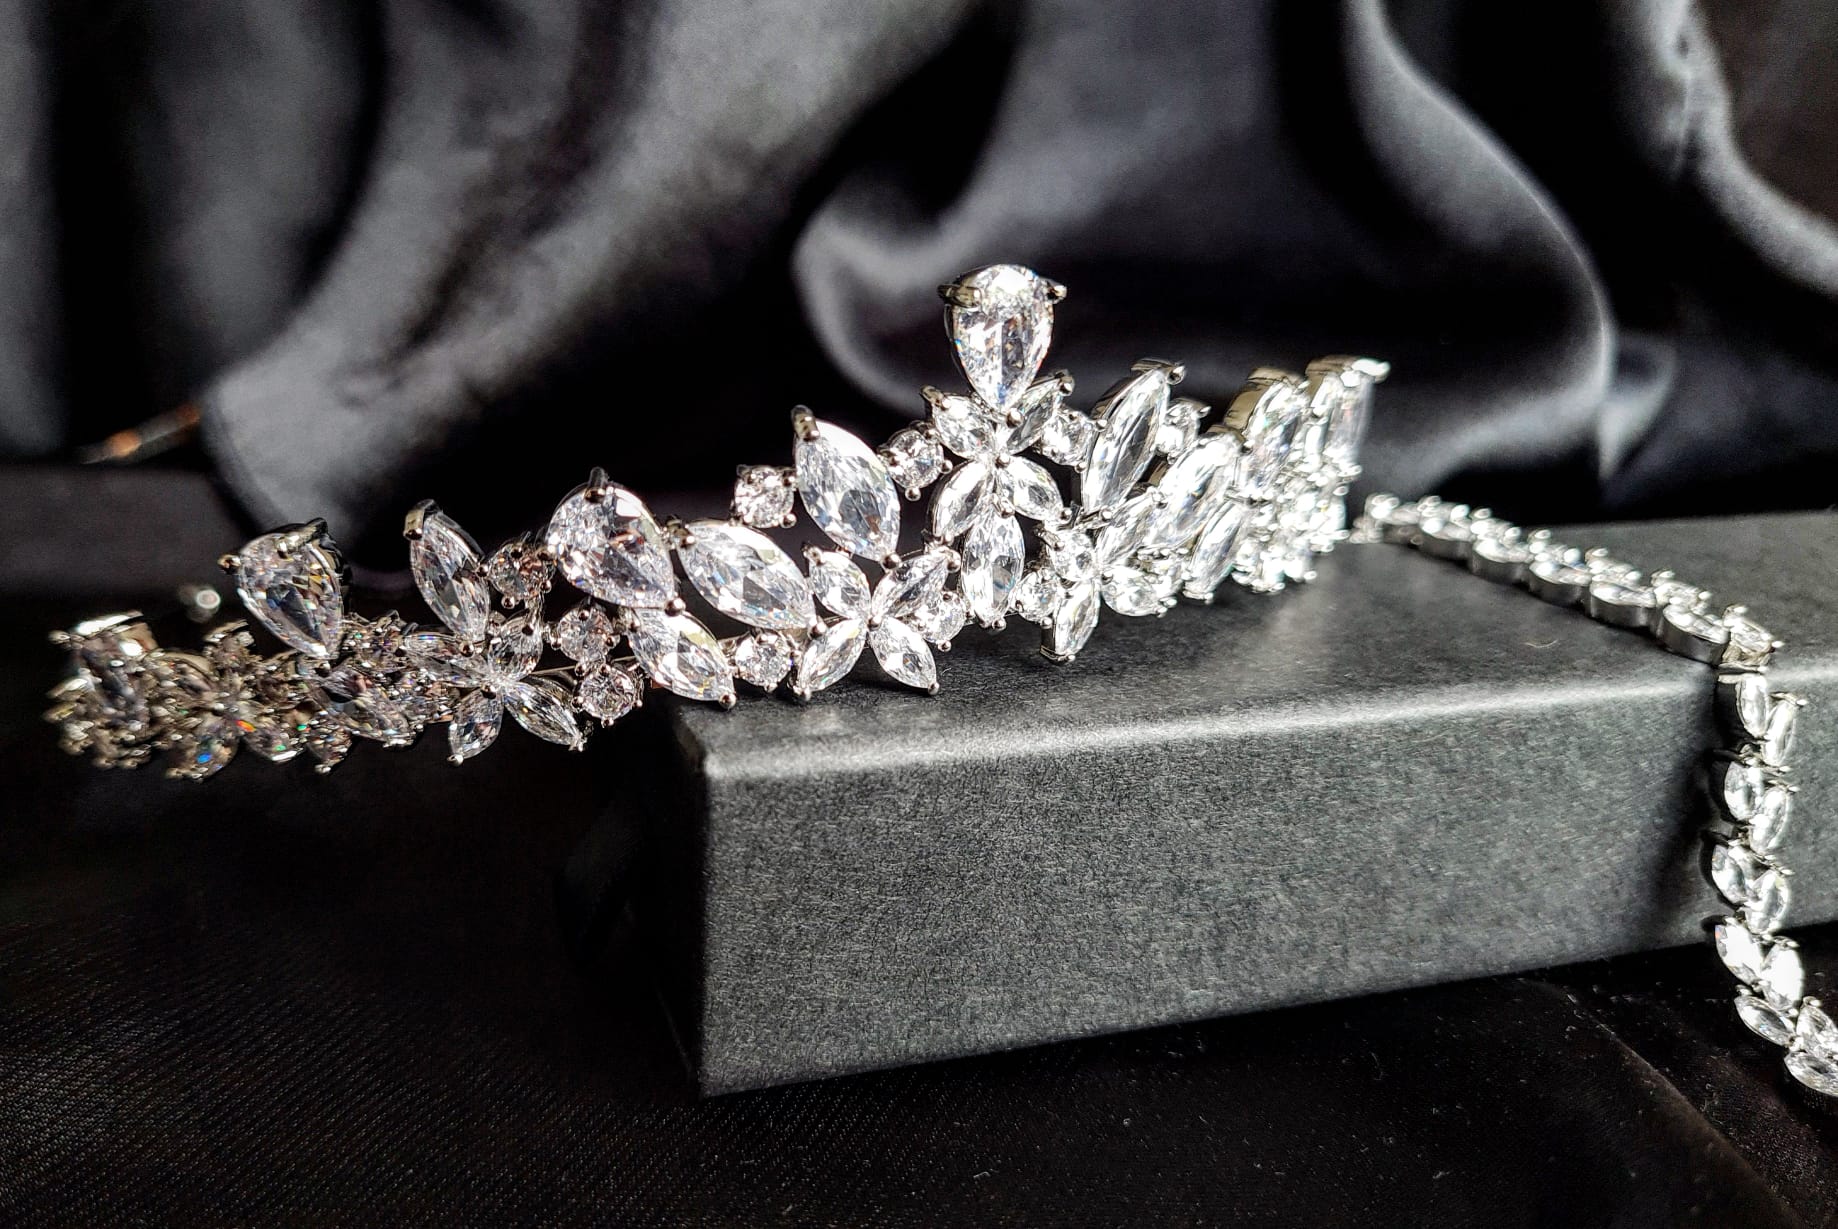 A tiara with diamonds on a black background. The tiara is made of silver and features a delicate design with cascading diamonds. The diamonds are clear and sparkling. The tiara is sitting on a table.